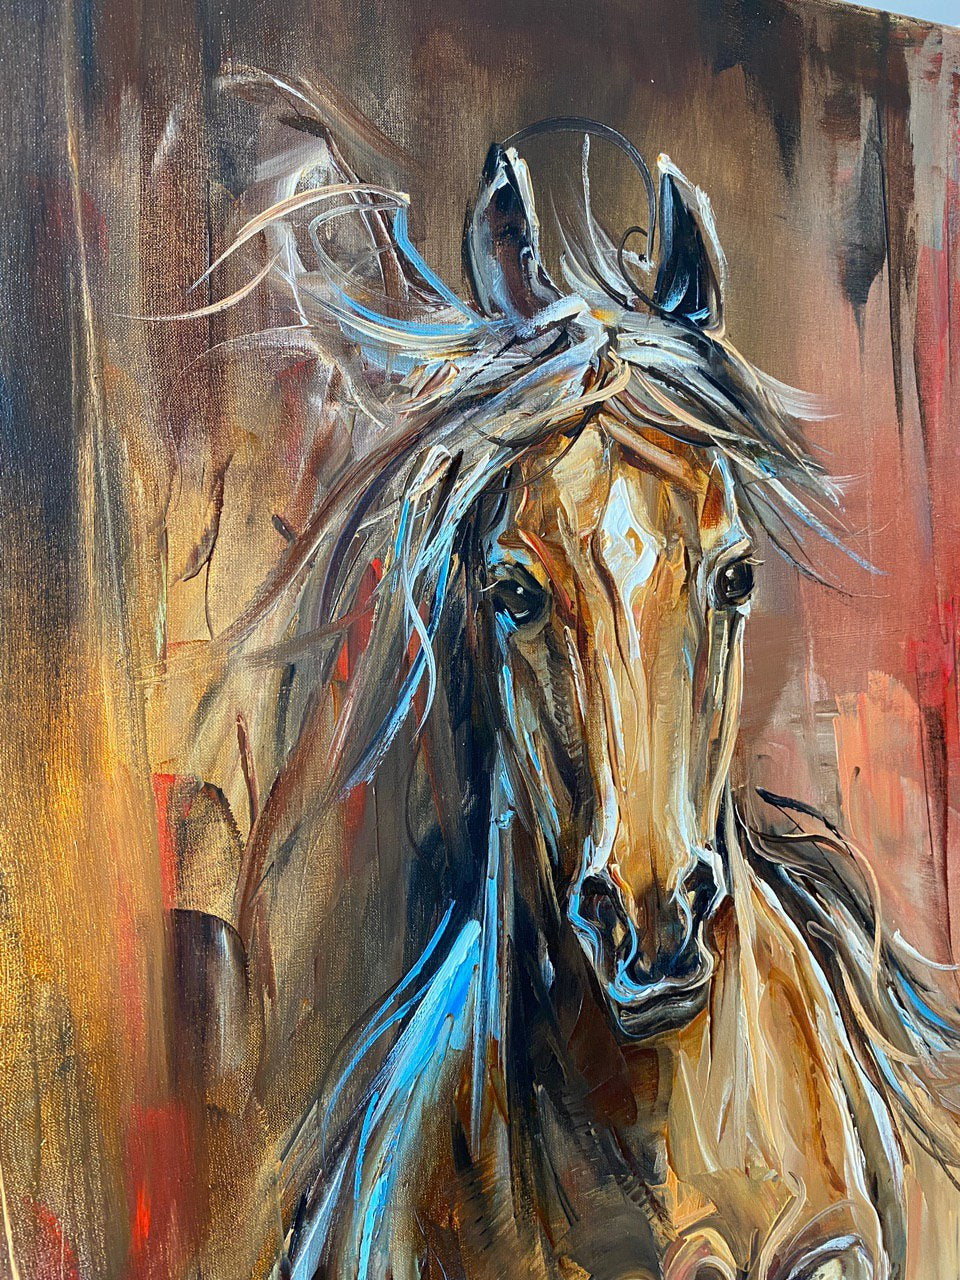 Running Horse Oil Painting on Canvas, Large Brown Horse Wall Art, Modern Abstract Horse Painting Original